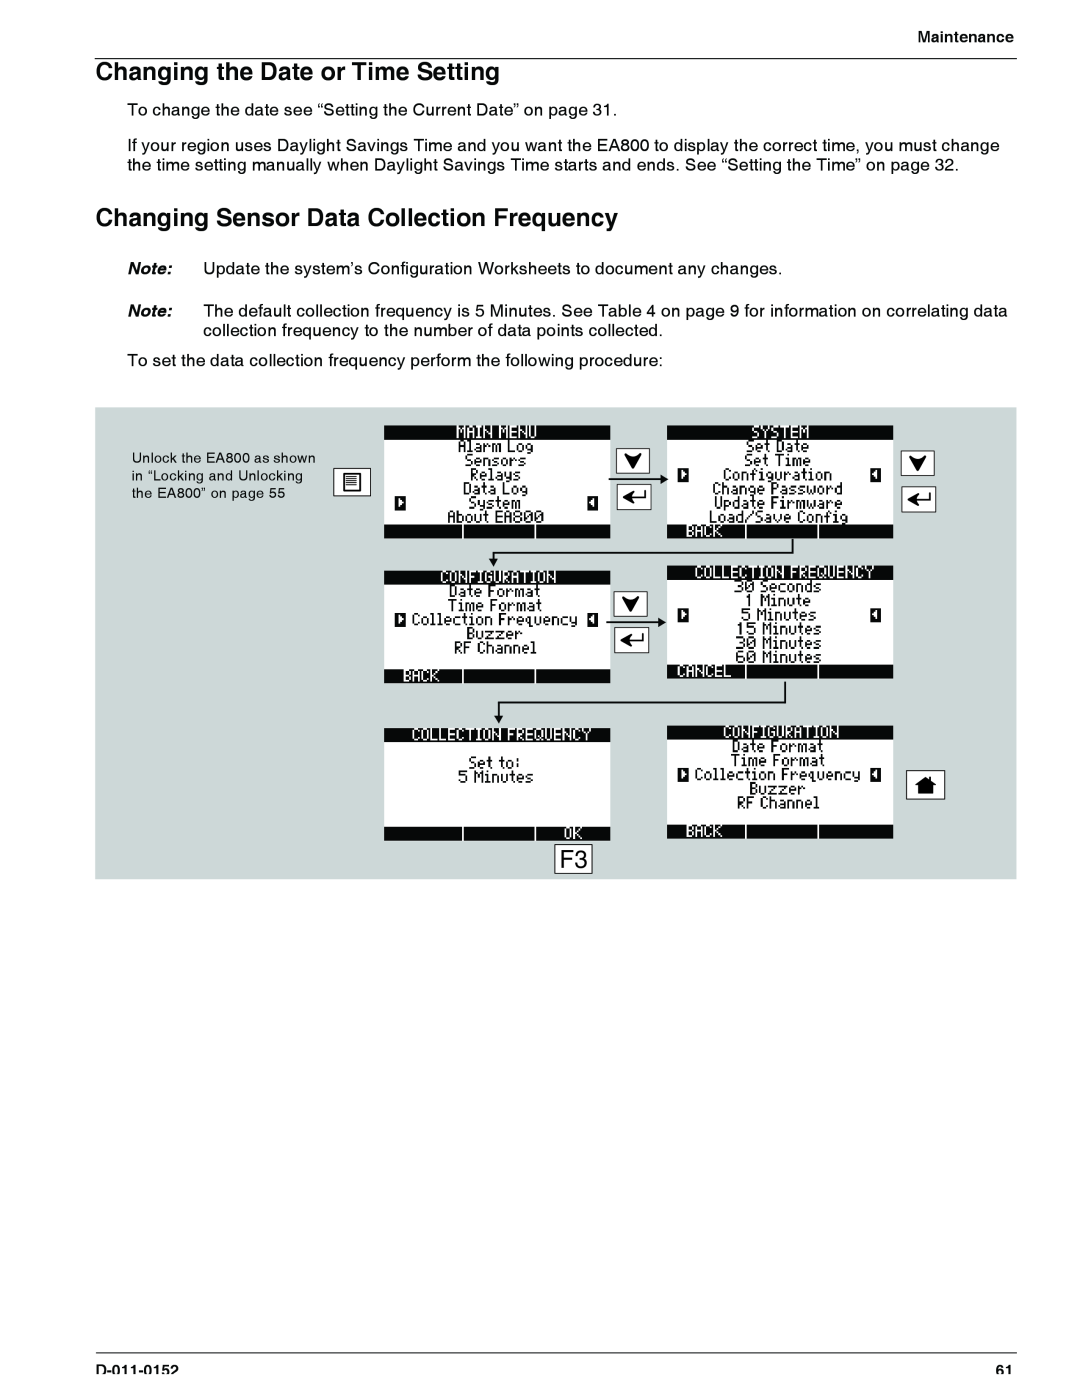 Enviro EA800 owner manual Changing the Date or Time Setting, Changing Sensor Data Collection Frequency 